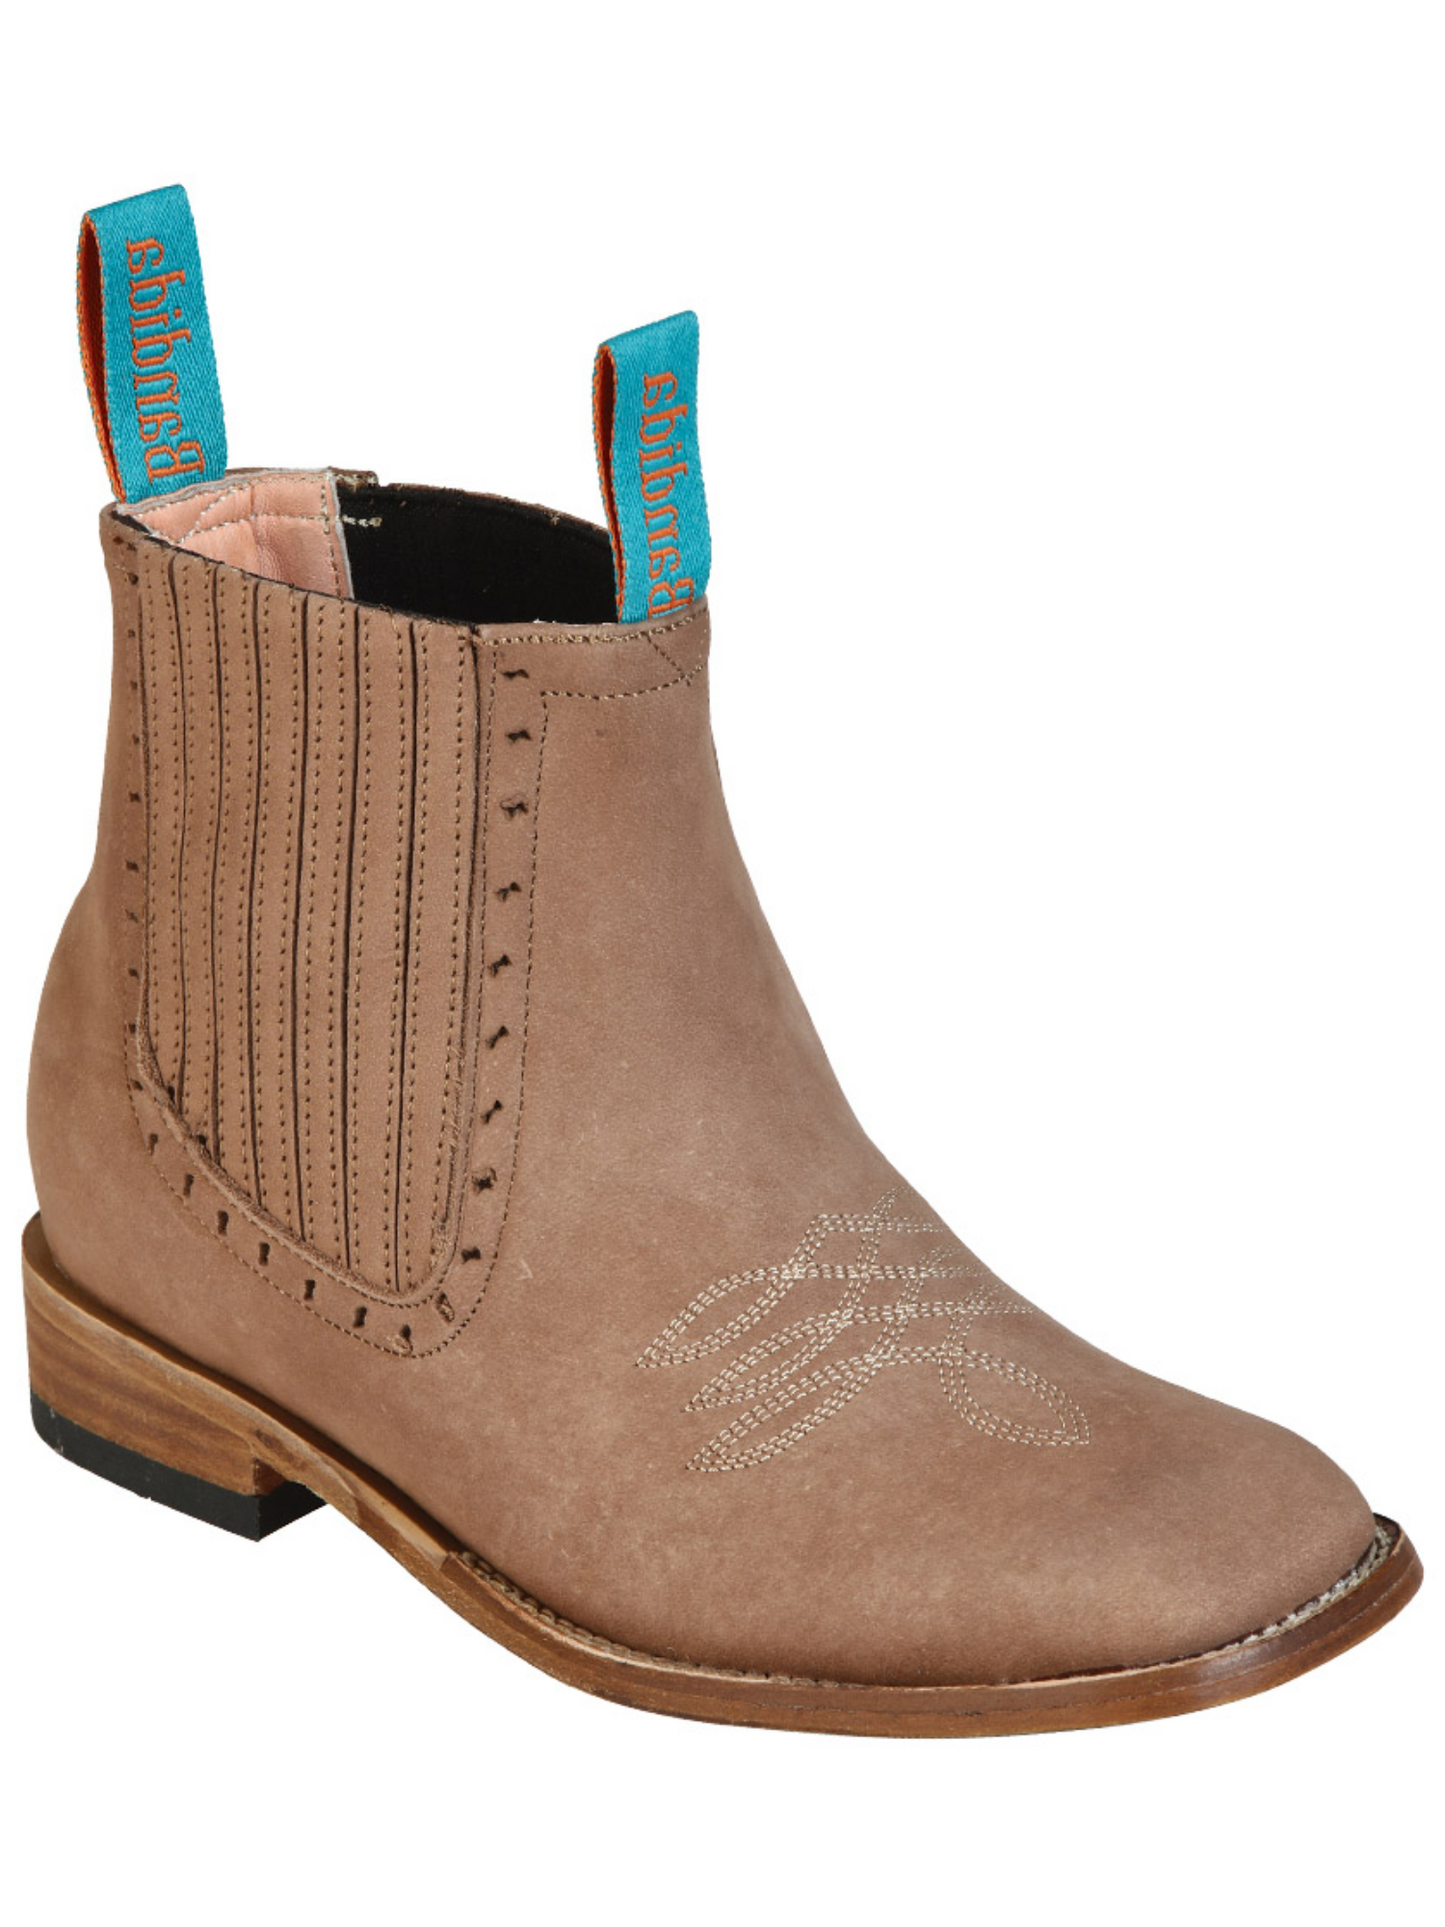 Classic Nubuck Leather Rodeo Cowboy Ankle Boots for Women 'La Barca' - ID: 126665 Western Ankle Boots La Barca